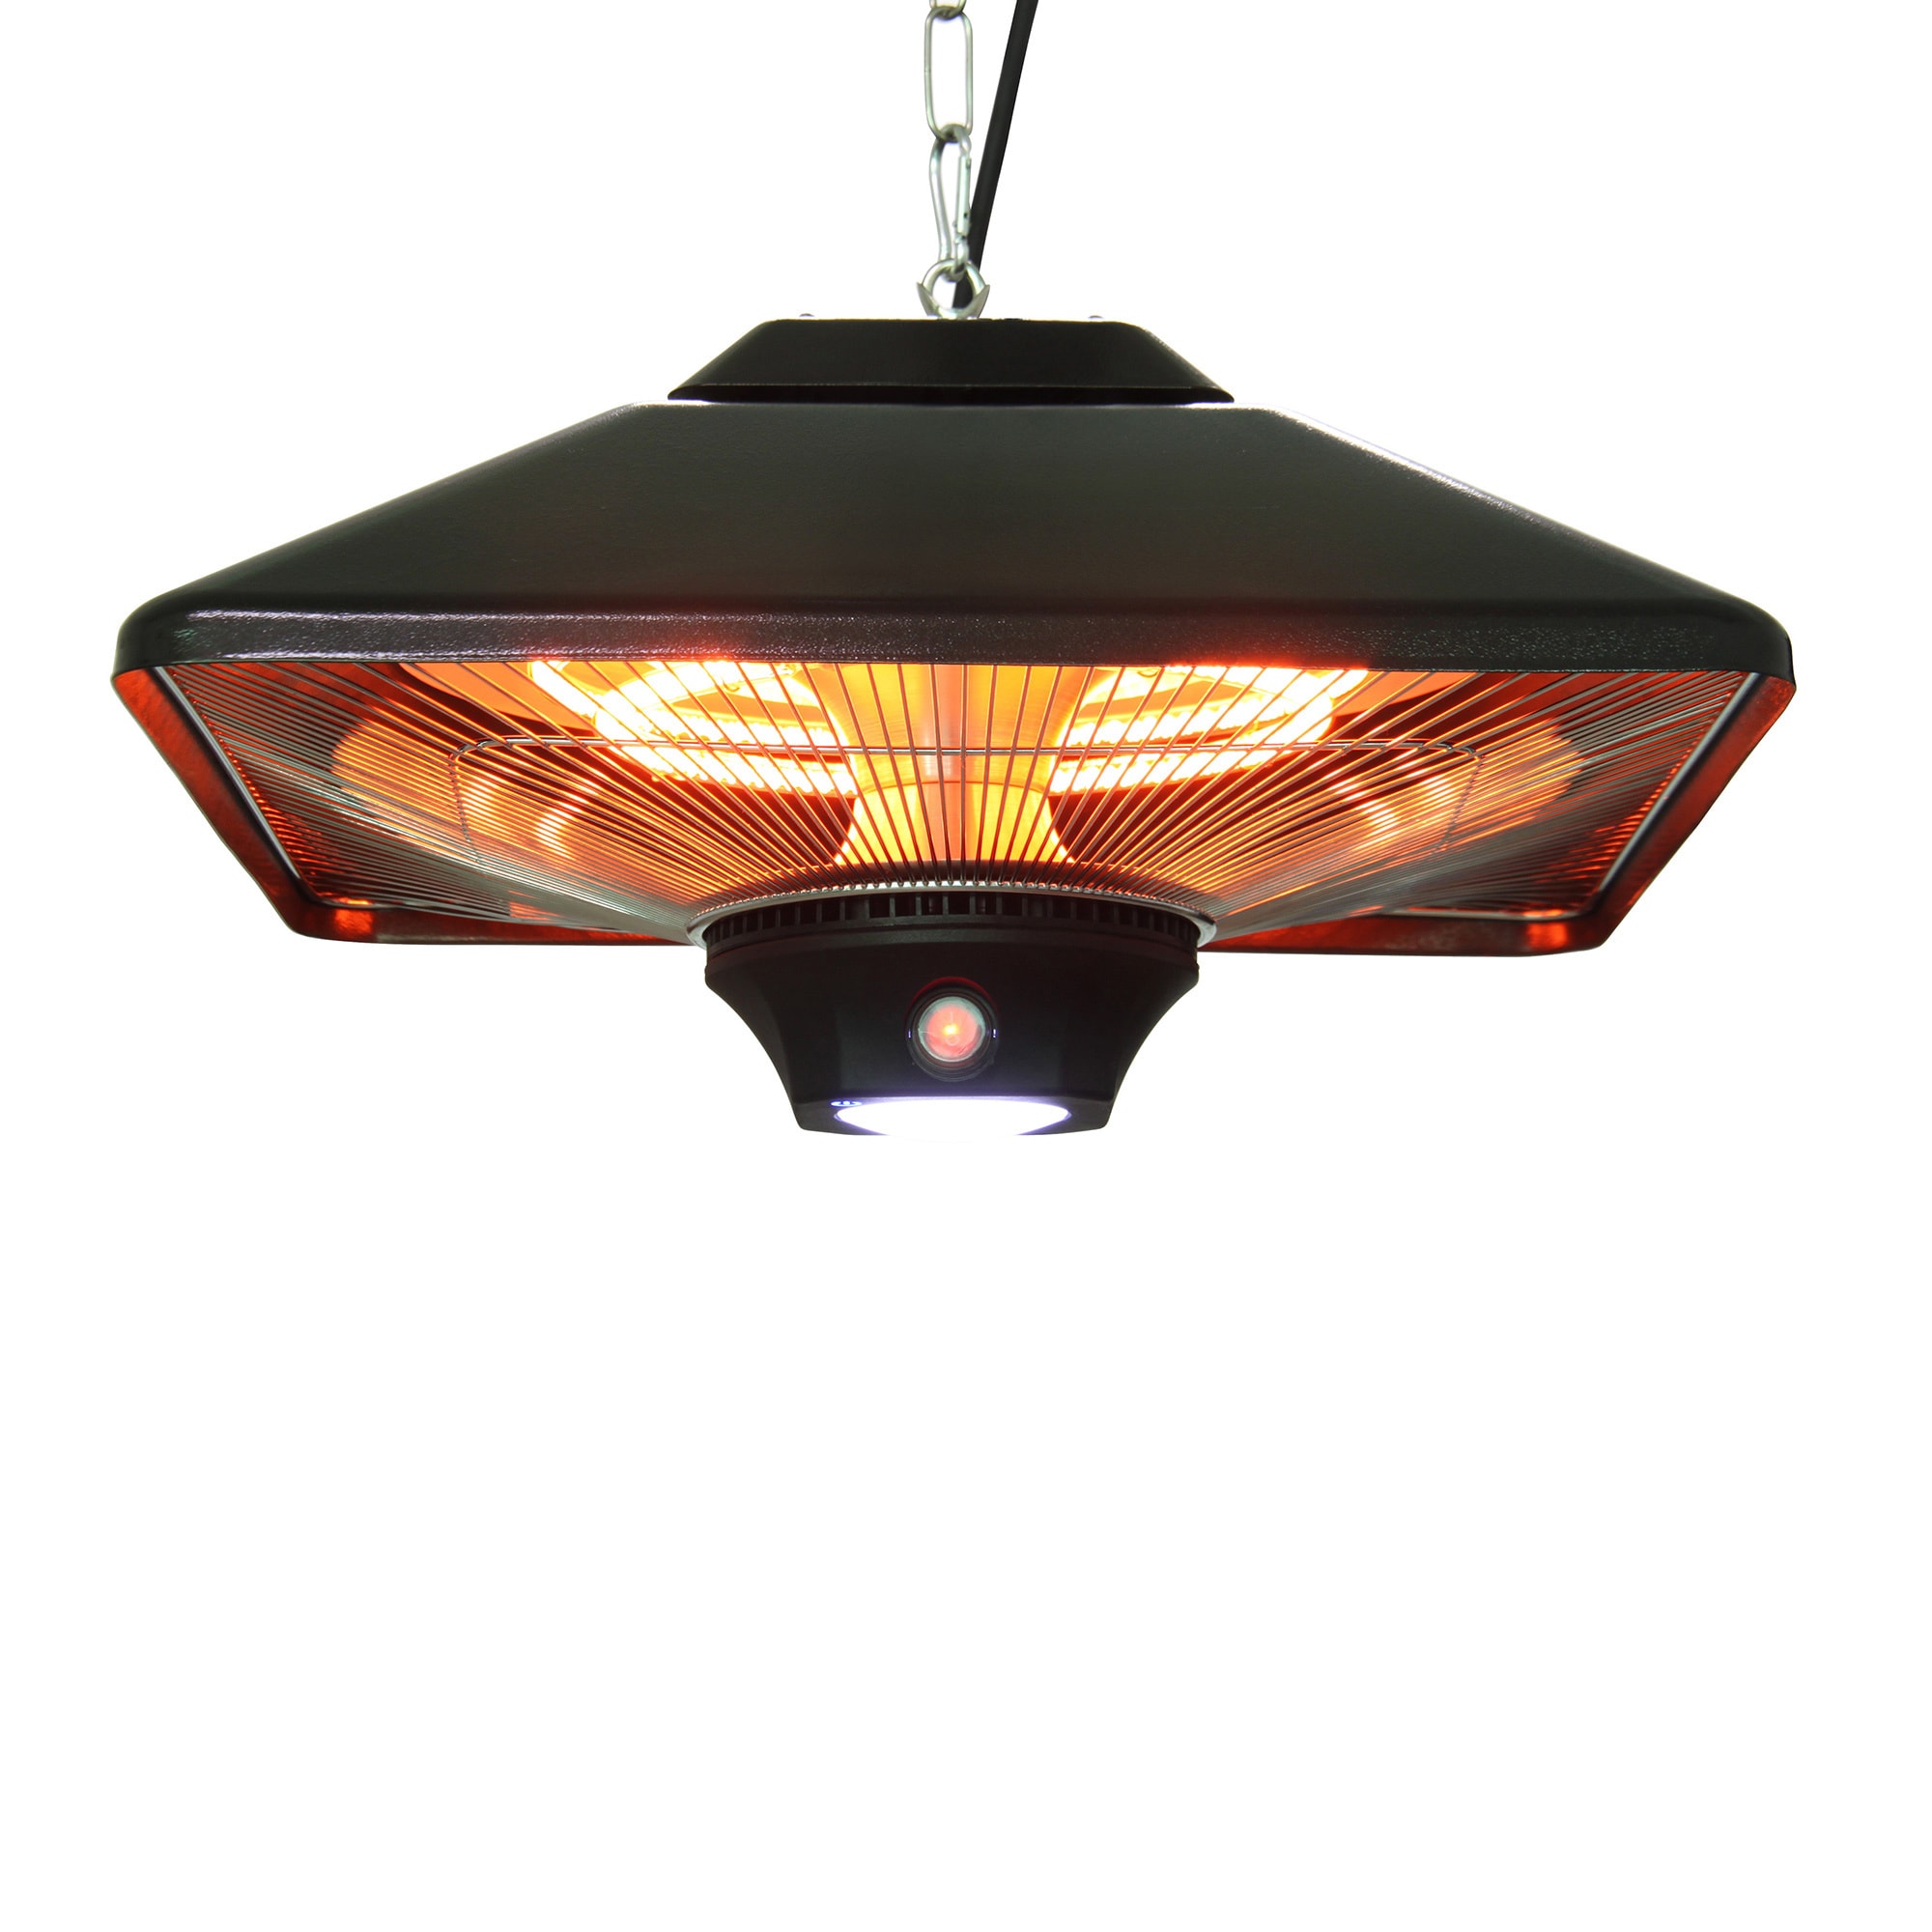 EnerG+ Hanging Electric Infrared Outdoor Heater